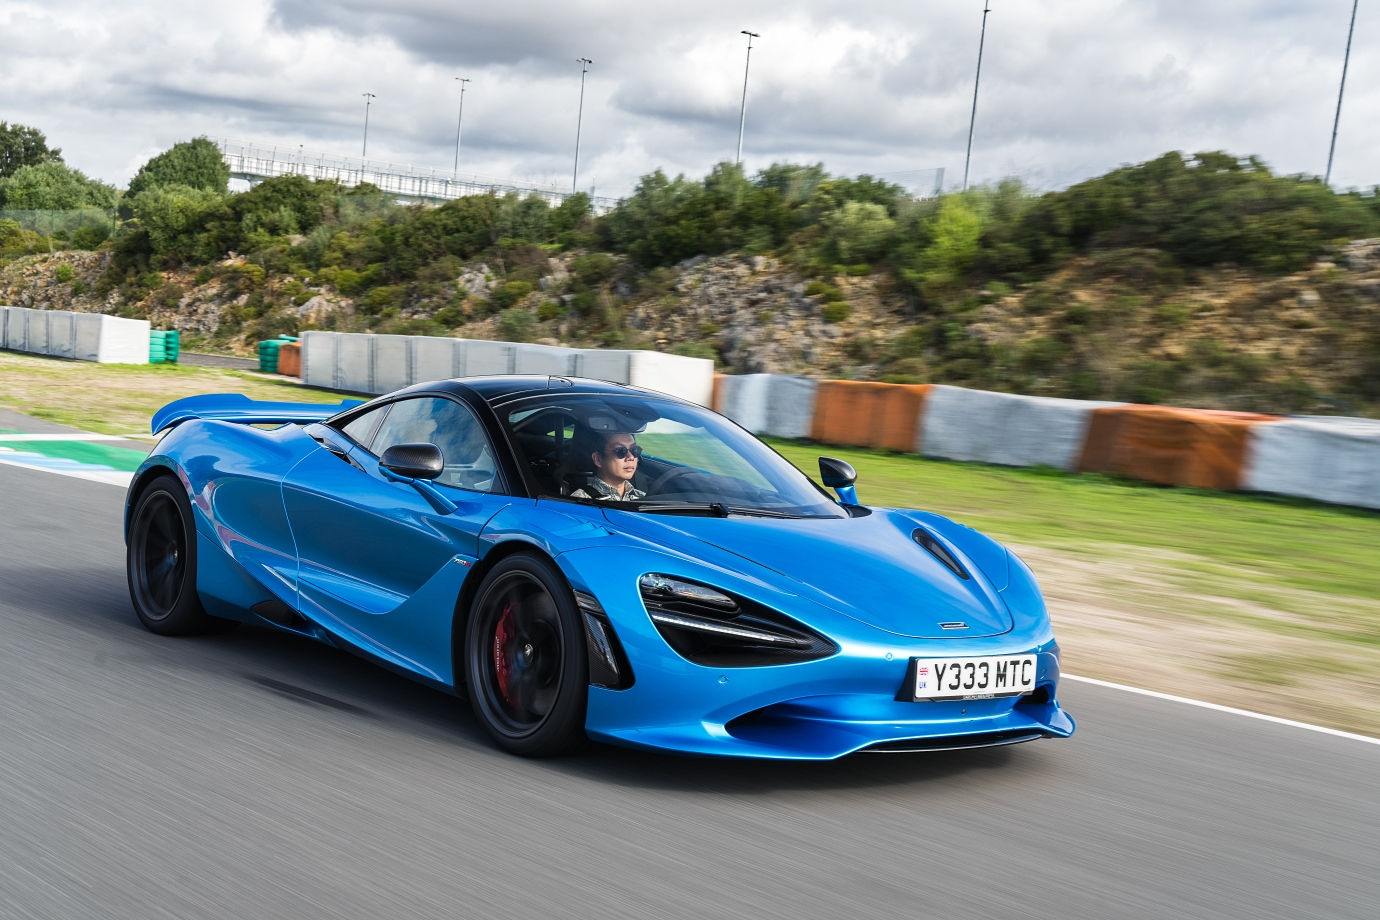 mclaren, 750s, 720s, mclaren 750s, mclaren 720s, eurokars, mclaren, 720s, mclaren 750s, mclaren 720s, mso, mclaren special operations, motorsports, mclaren 750s first drive review : mac the knife